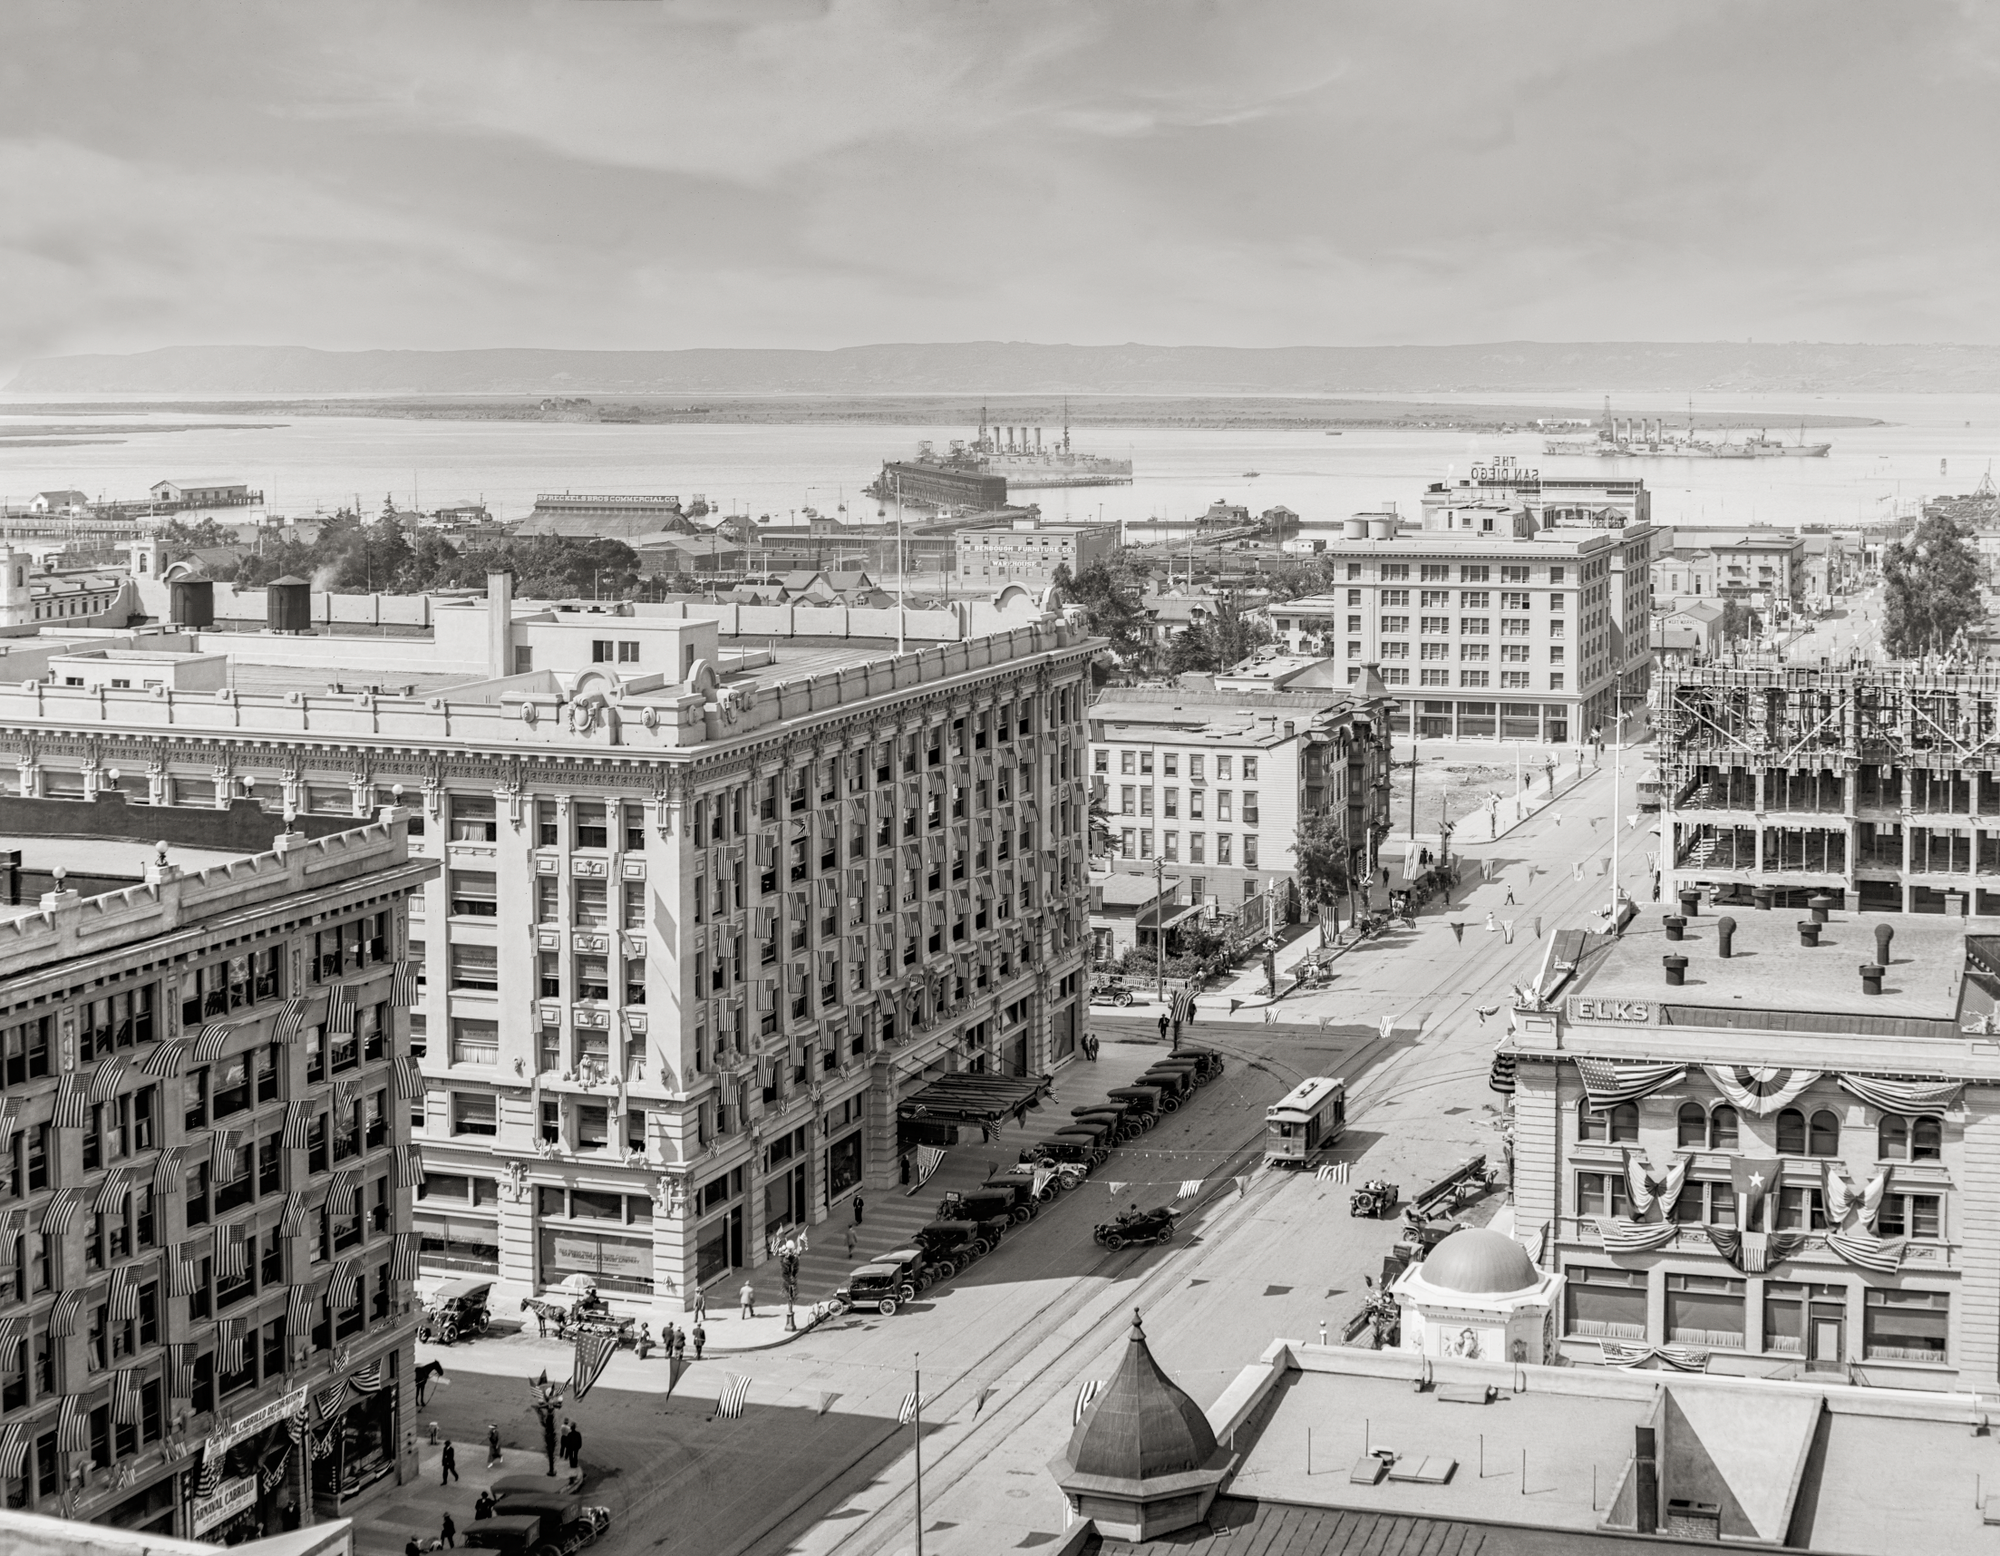 San Diego and Bay, 1910, Taken from U.S. Grant Hotel